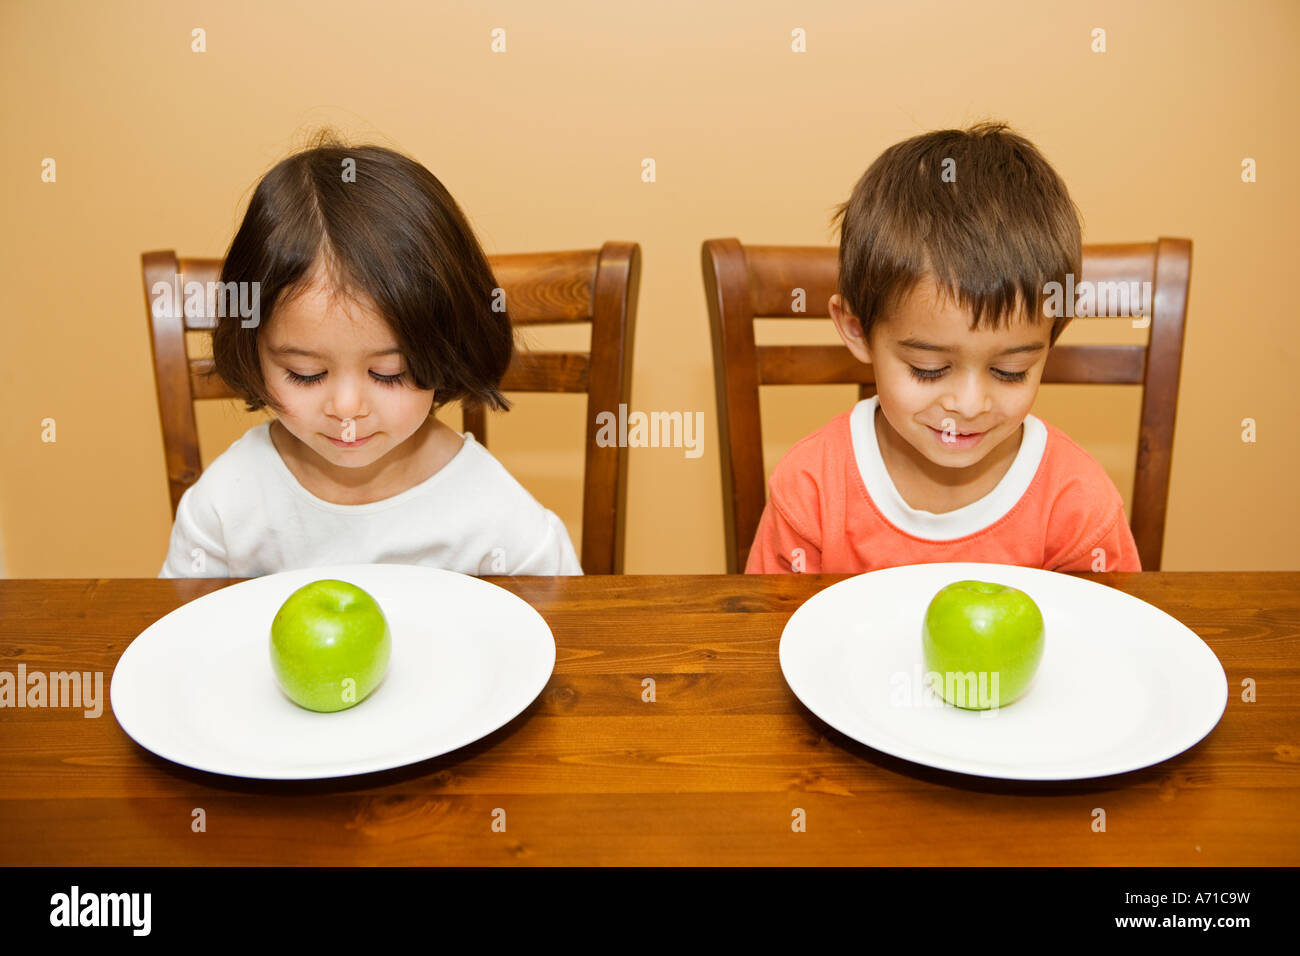 Boy and girl at table with apples on plates Stock Photo